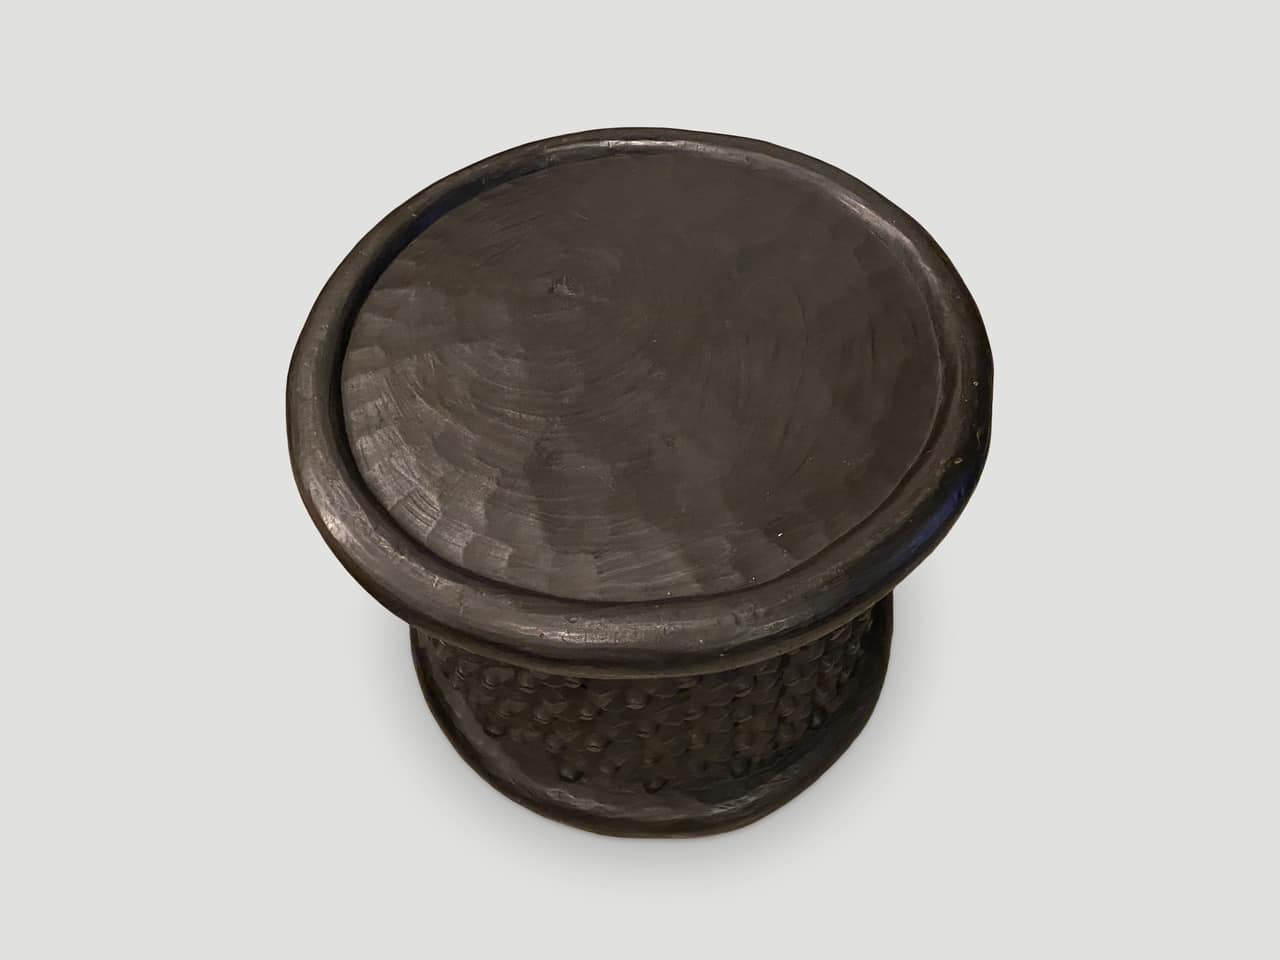 AFRICAN TRAY COFFEE TABLE OR SIDE TABLE